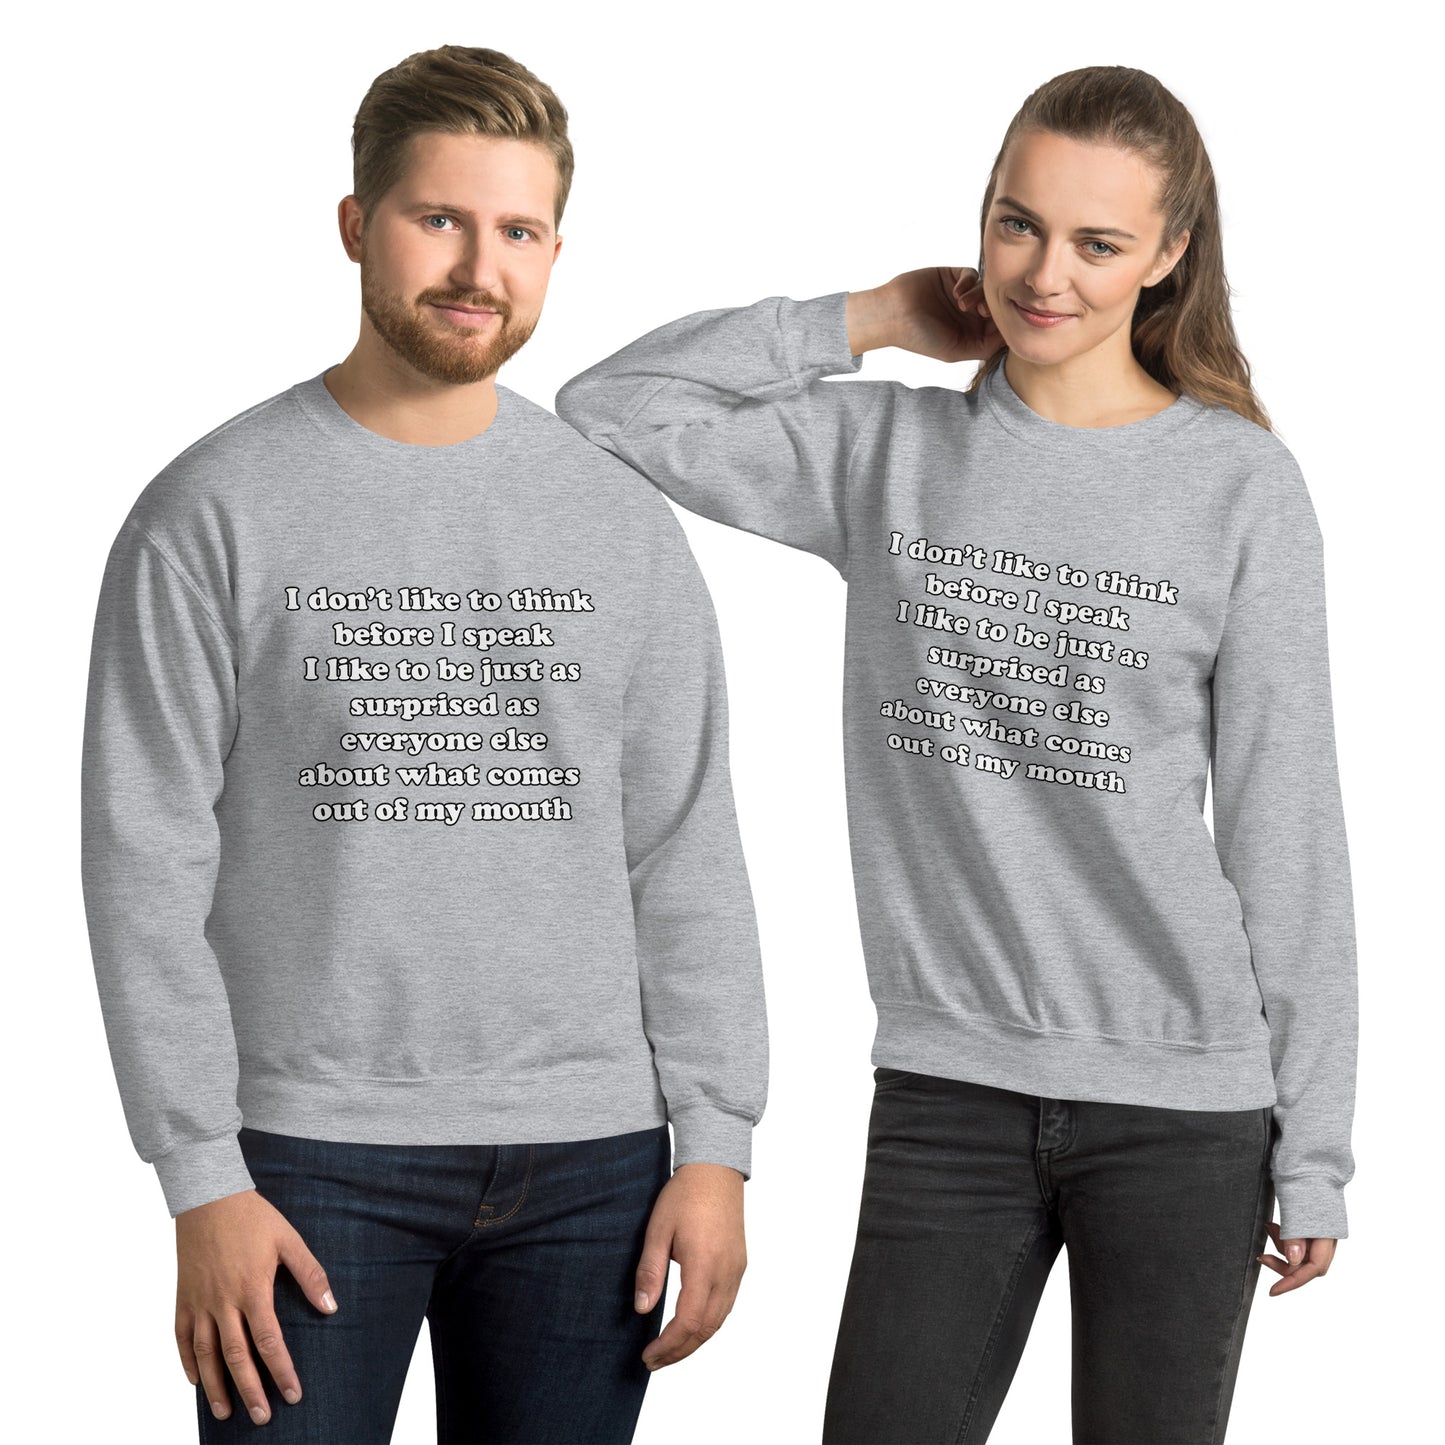 Man and woman with grey sweatshirt with text “I don't think before I speak Just as serprised as everyone about what comes out of my mouth"